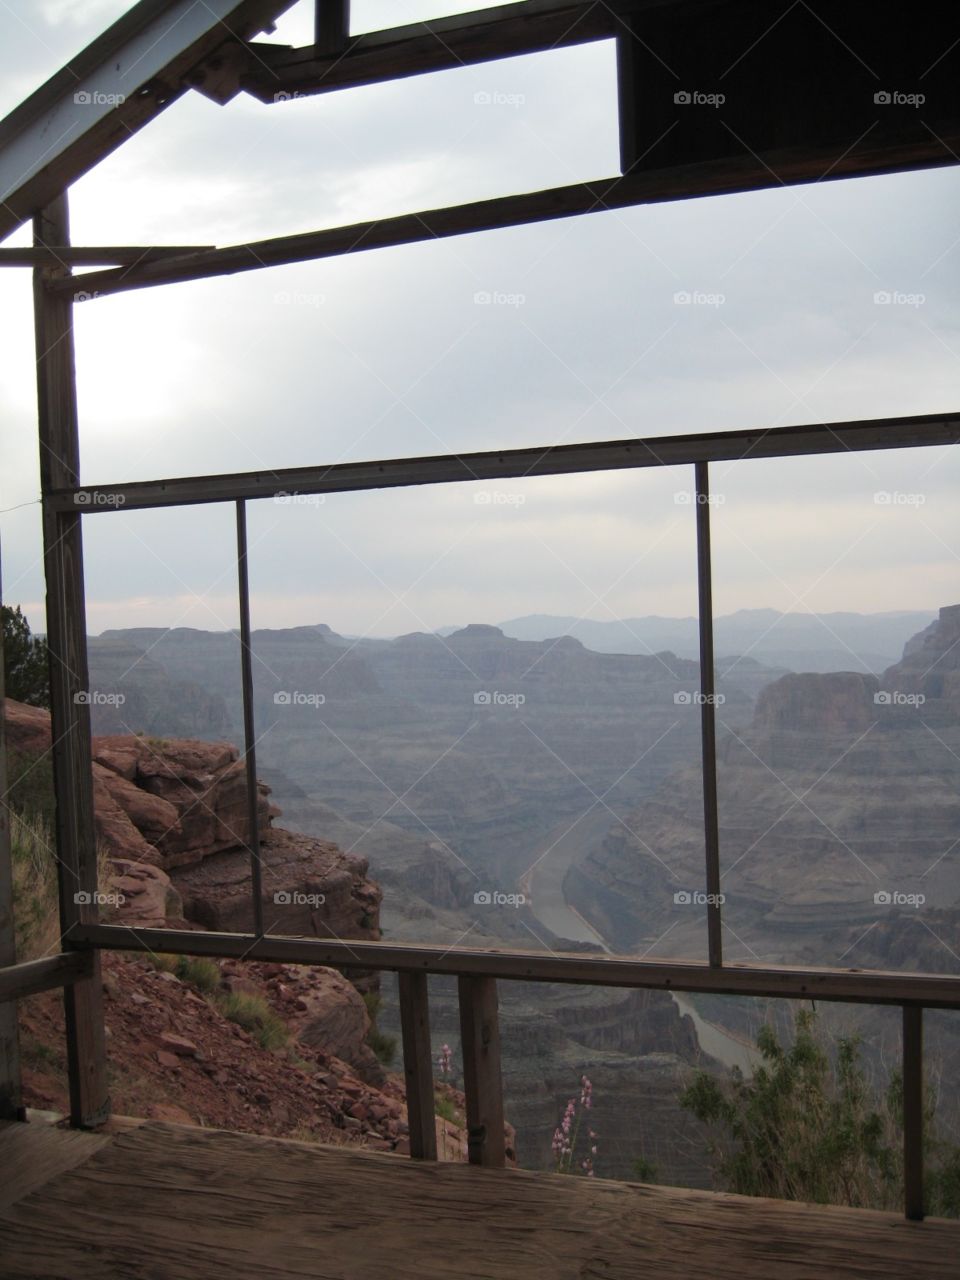 House with Grand Canyon view. House with no walls, only views.